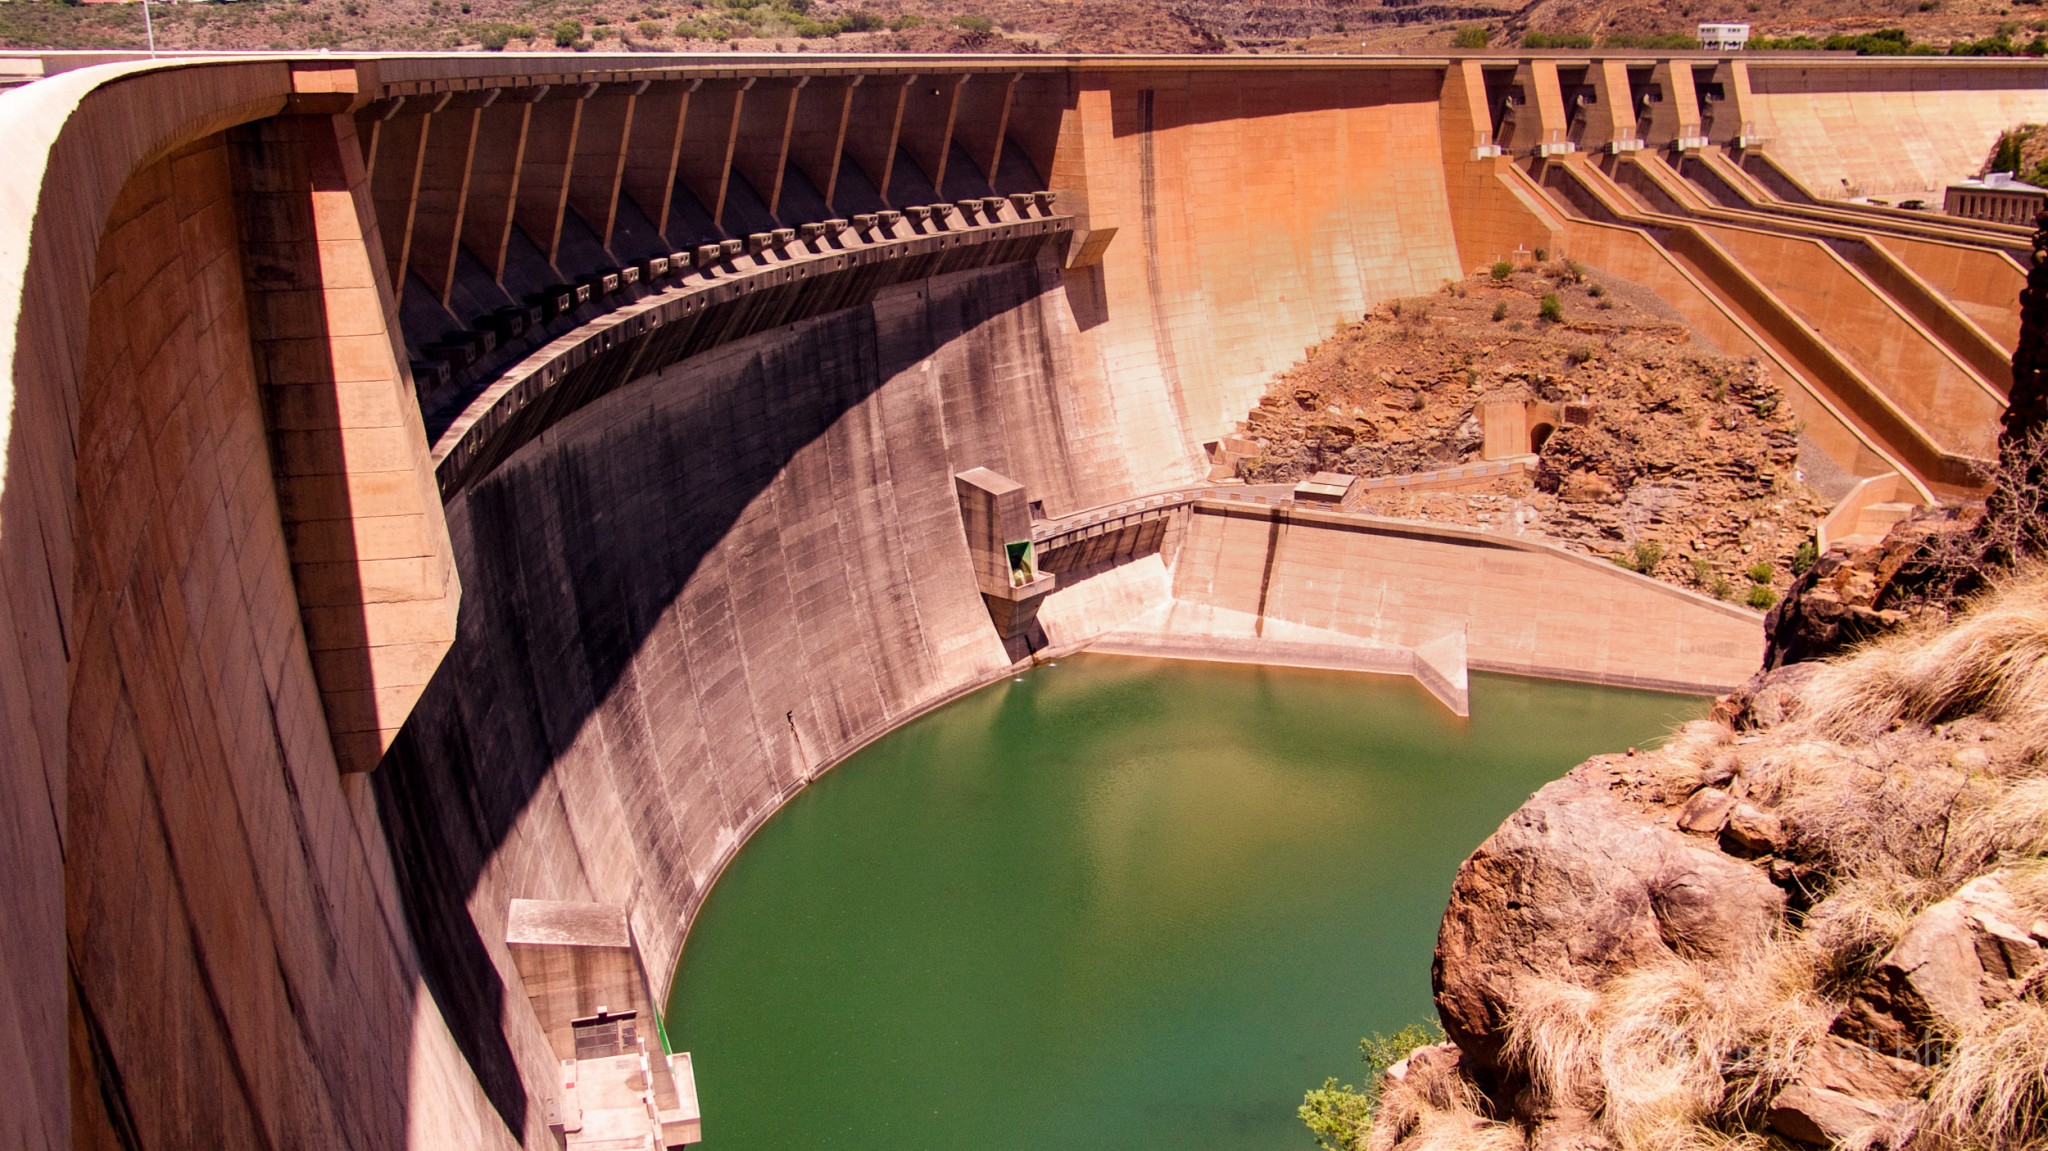 The Vandekloof Dam on the Orange River in Northern Cape province was completed in 1977 and holds back one of South Africa’s largest reservoirs.